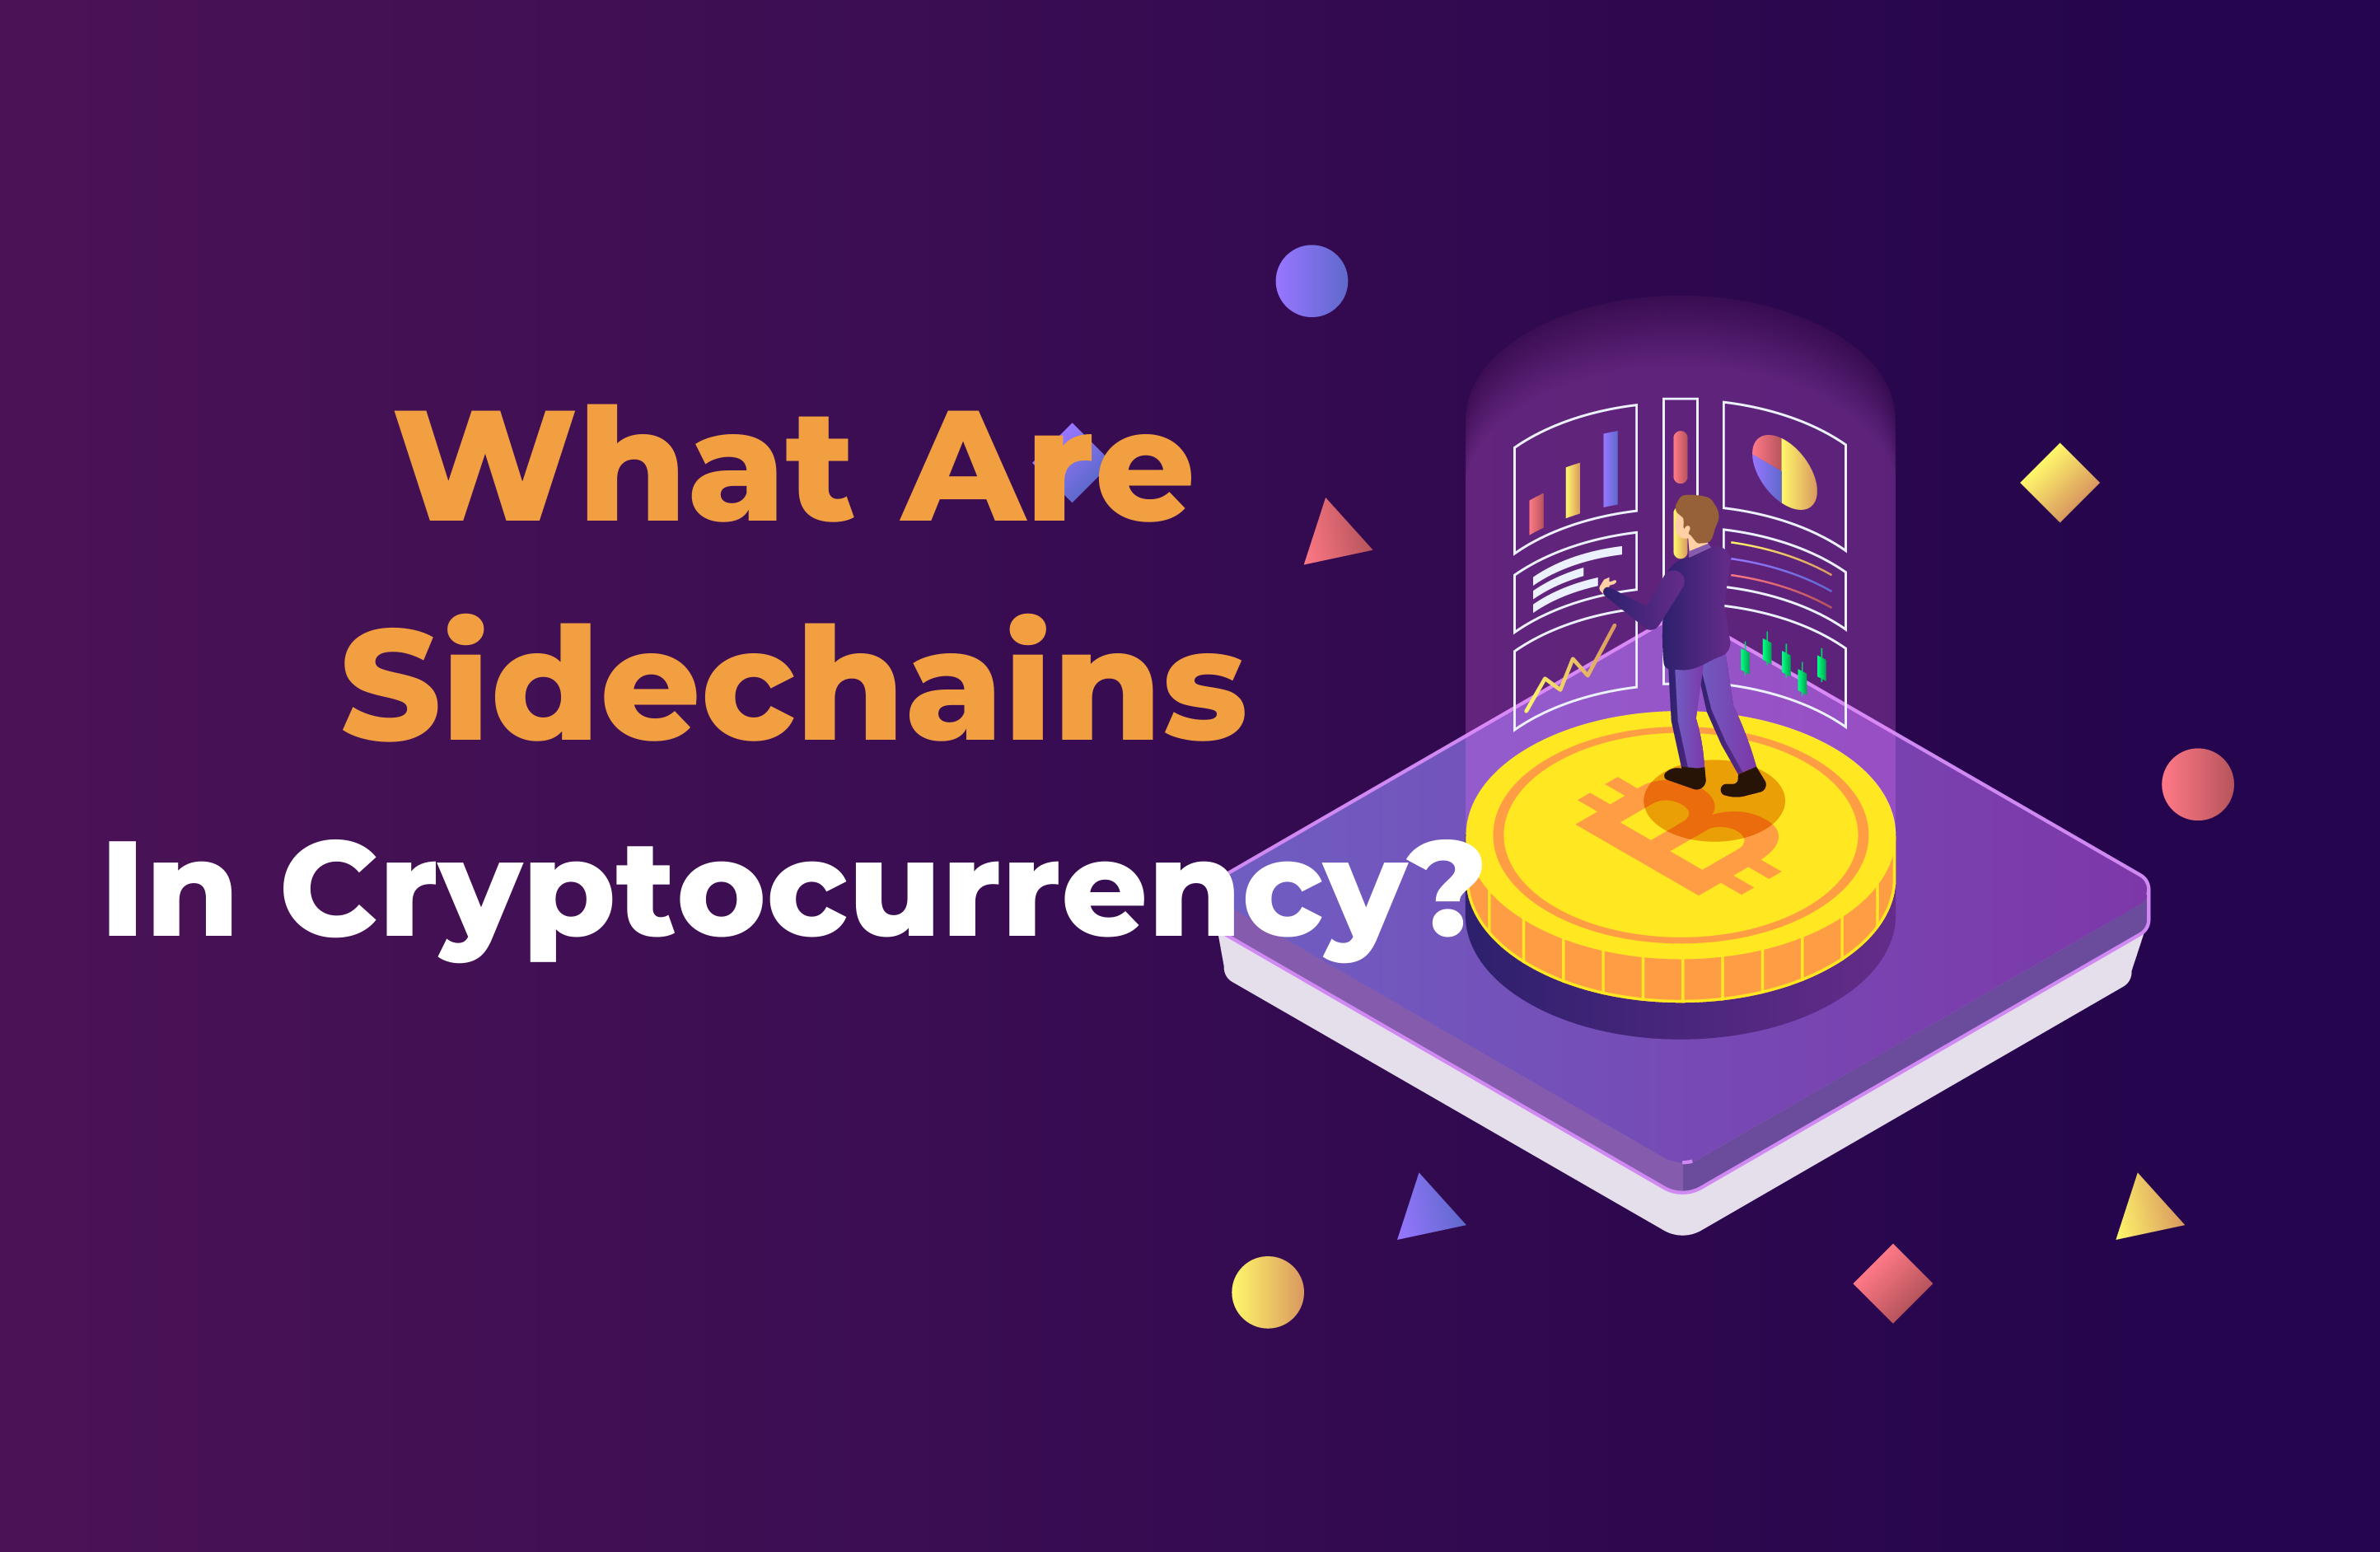 What Are Sidechains In Cryptocurrency?